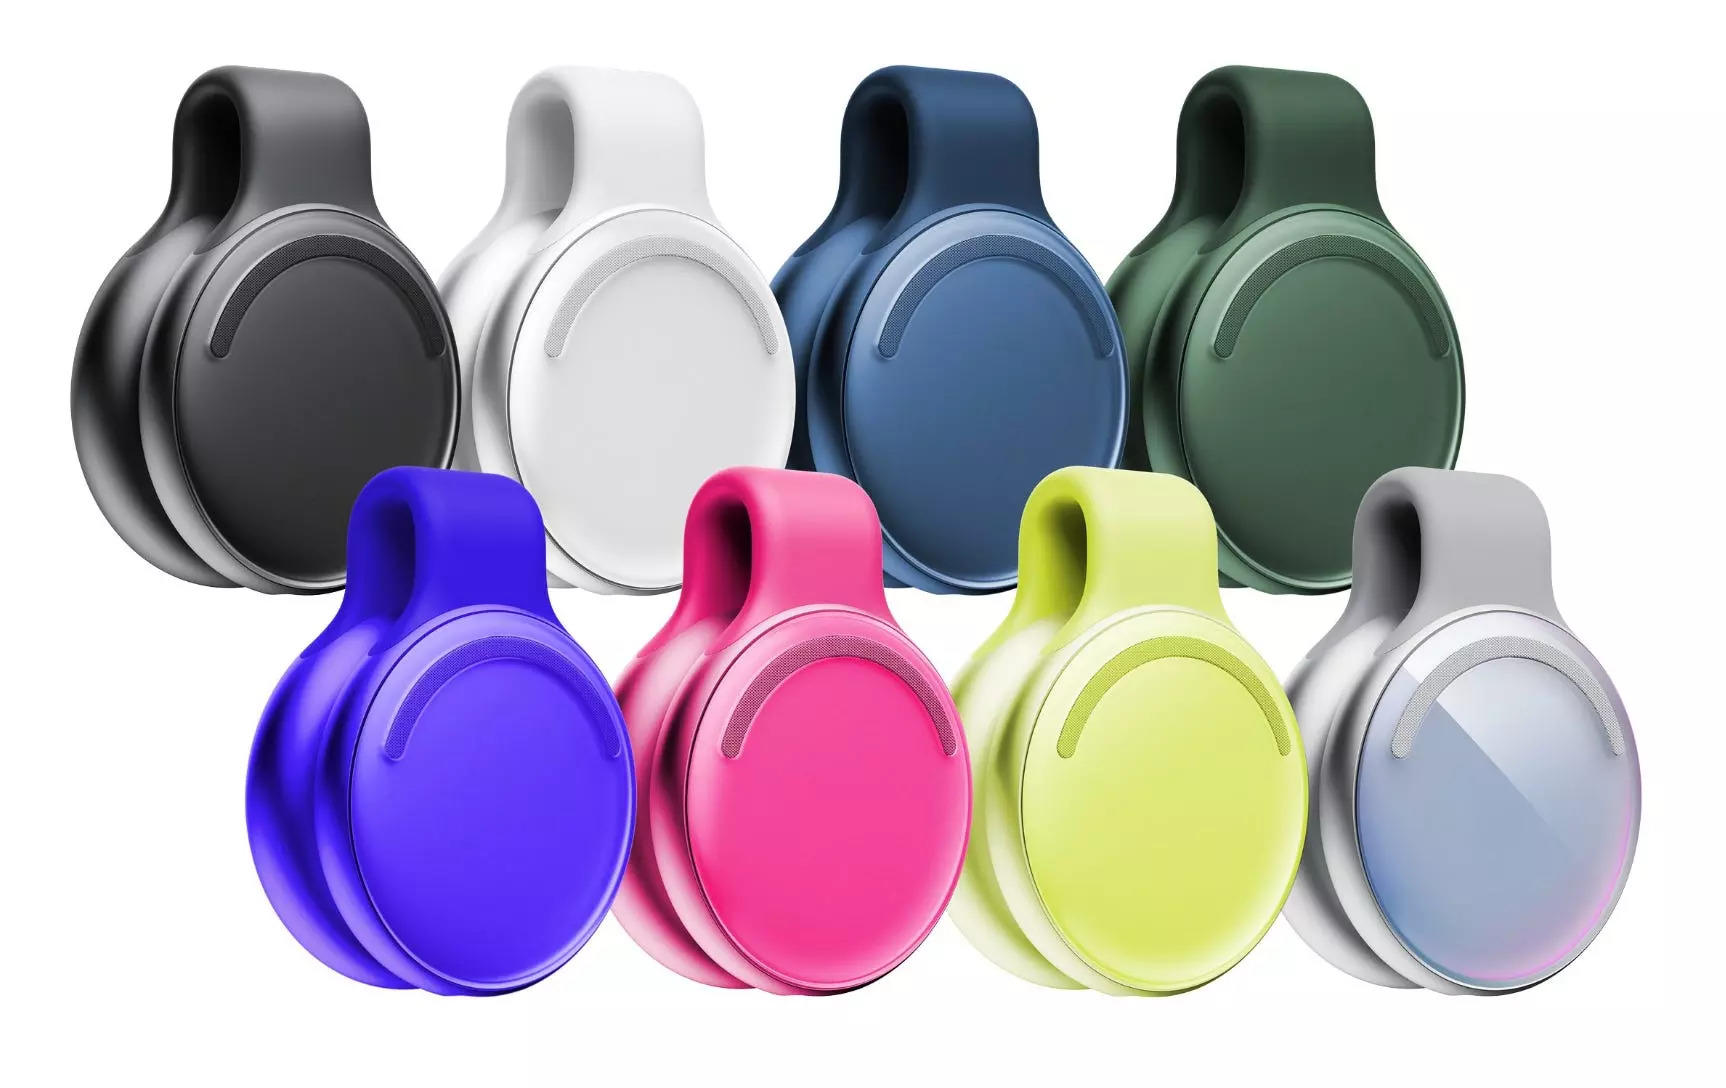 eight Limitless AI pendants, in various colors, that clip onto your clothes and record what you hear throughout the day